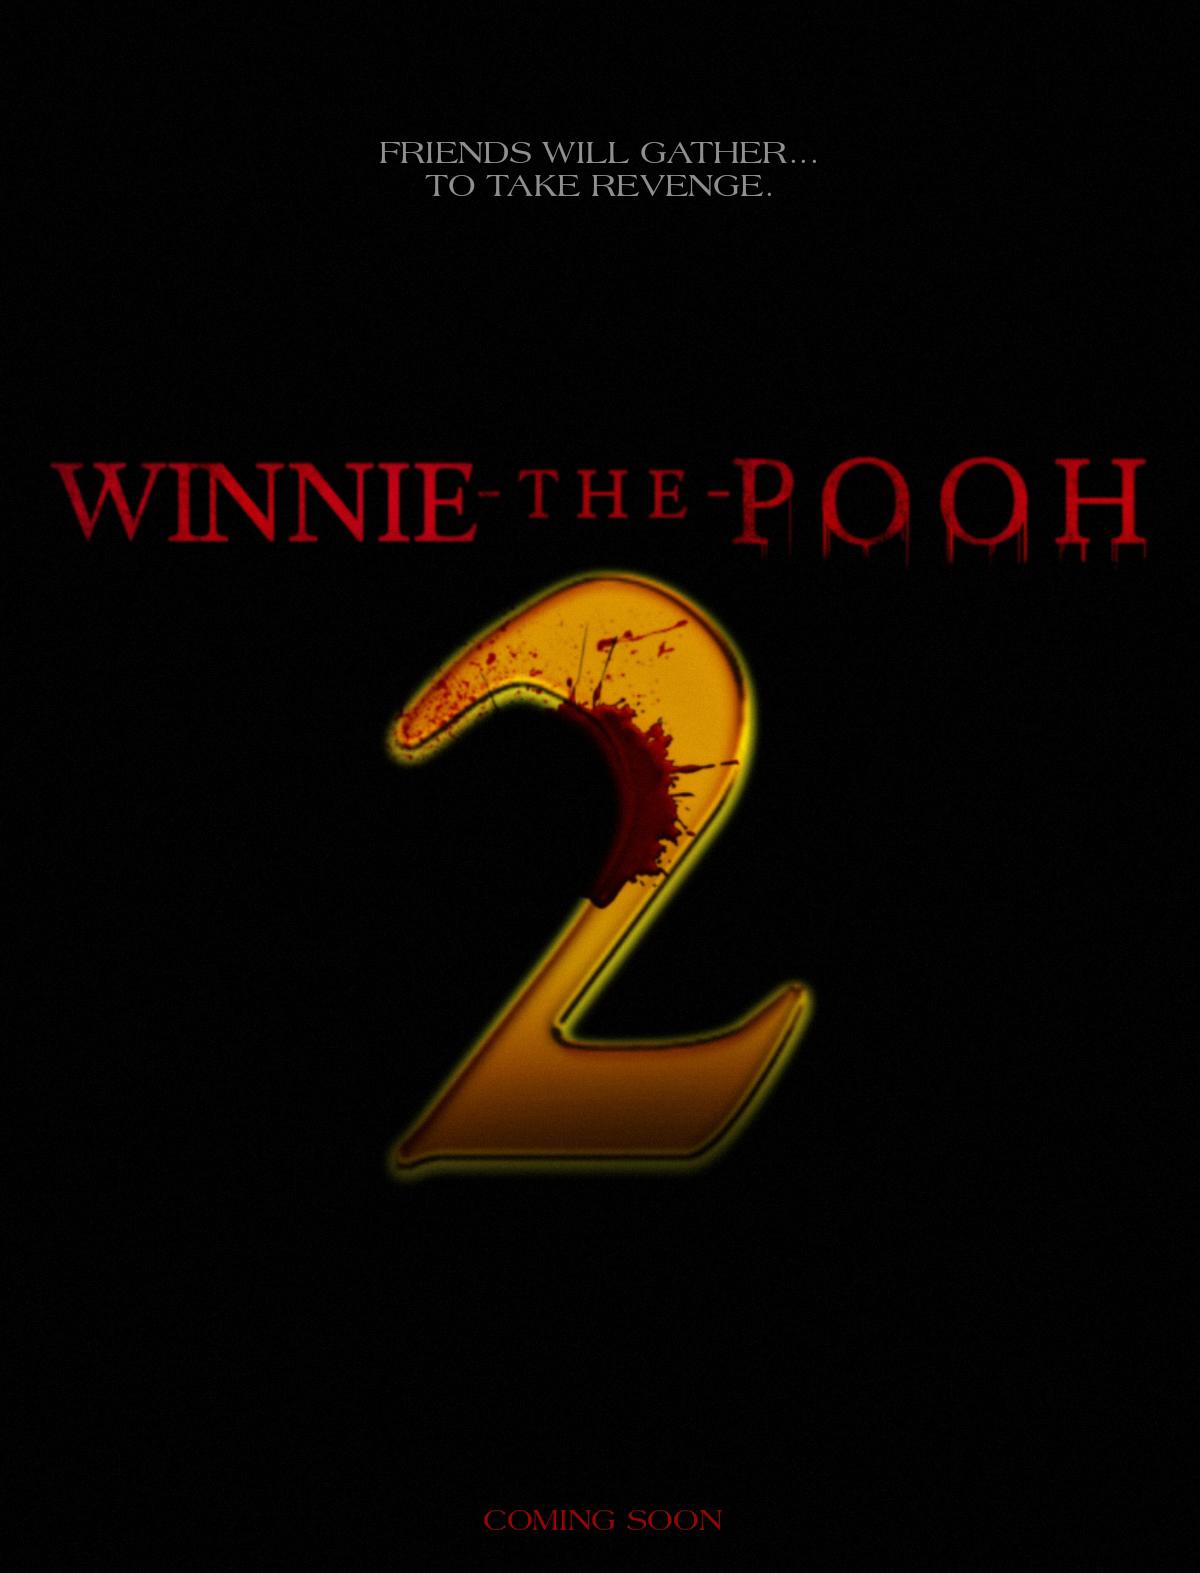 Winnie The Pooh Blood and Honey 2 - Teaser Poster